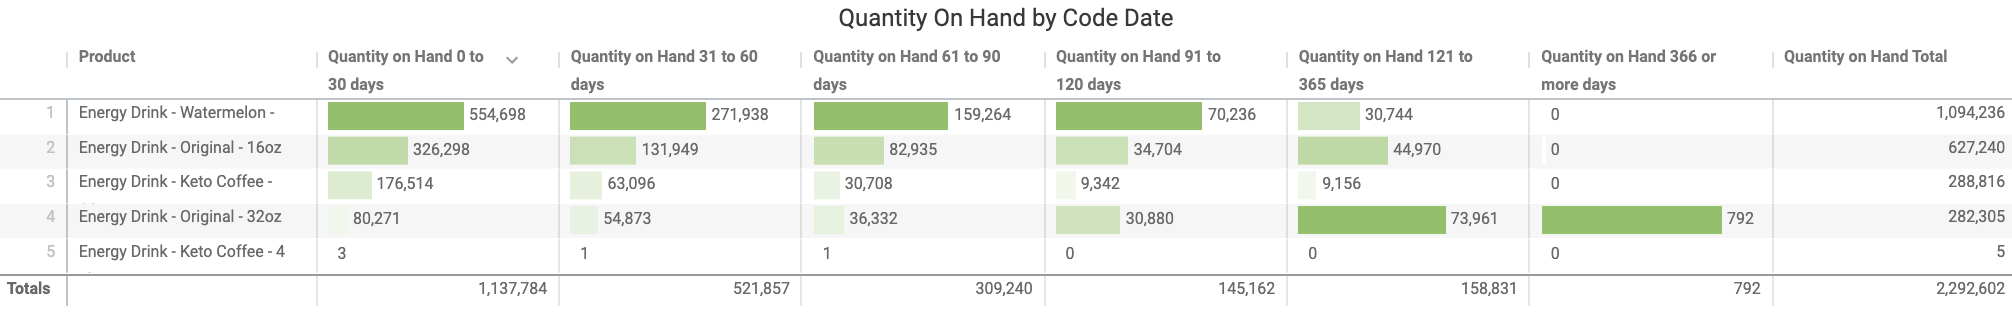 Quantity_on_Hand_by_Code_Date.png